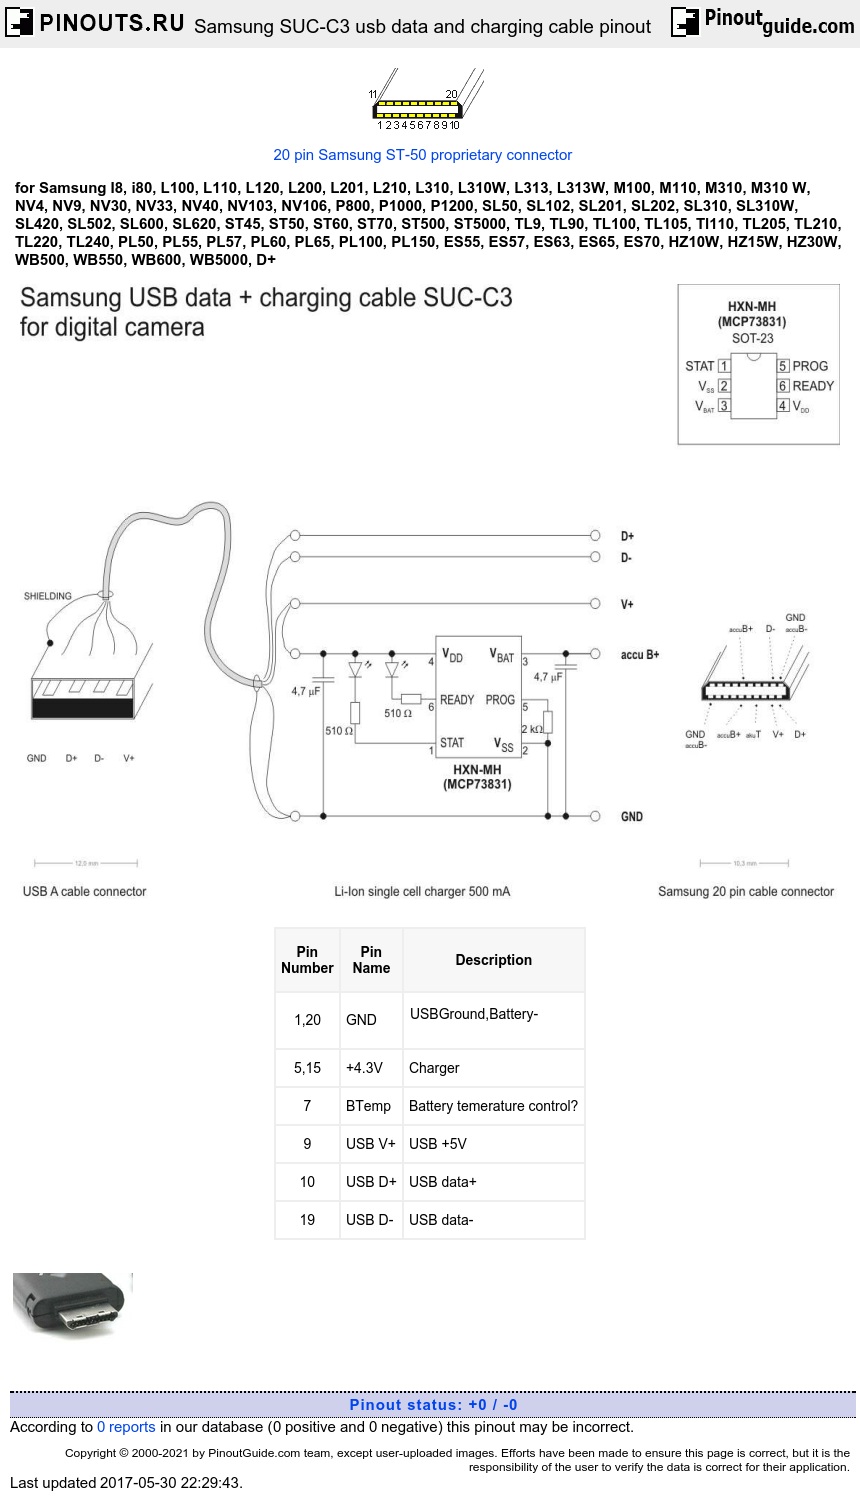 Samsung SUC-C3 usb data and charging cable diagram